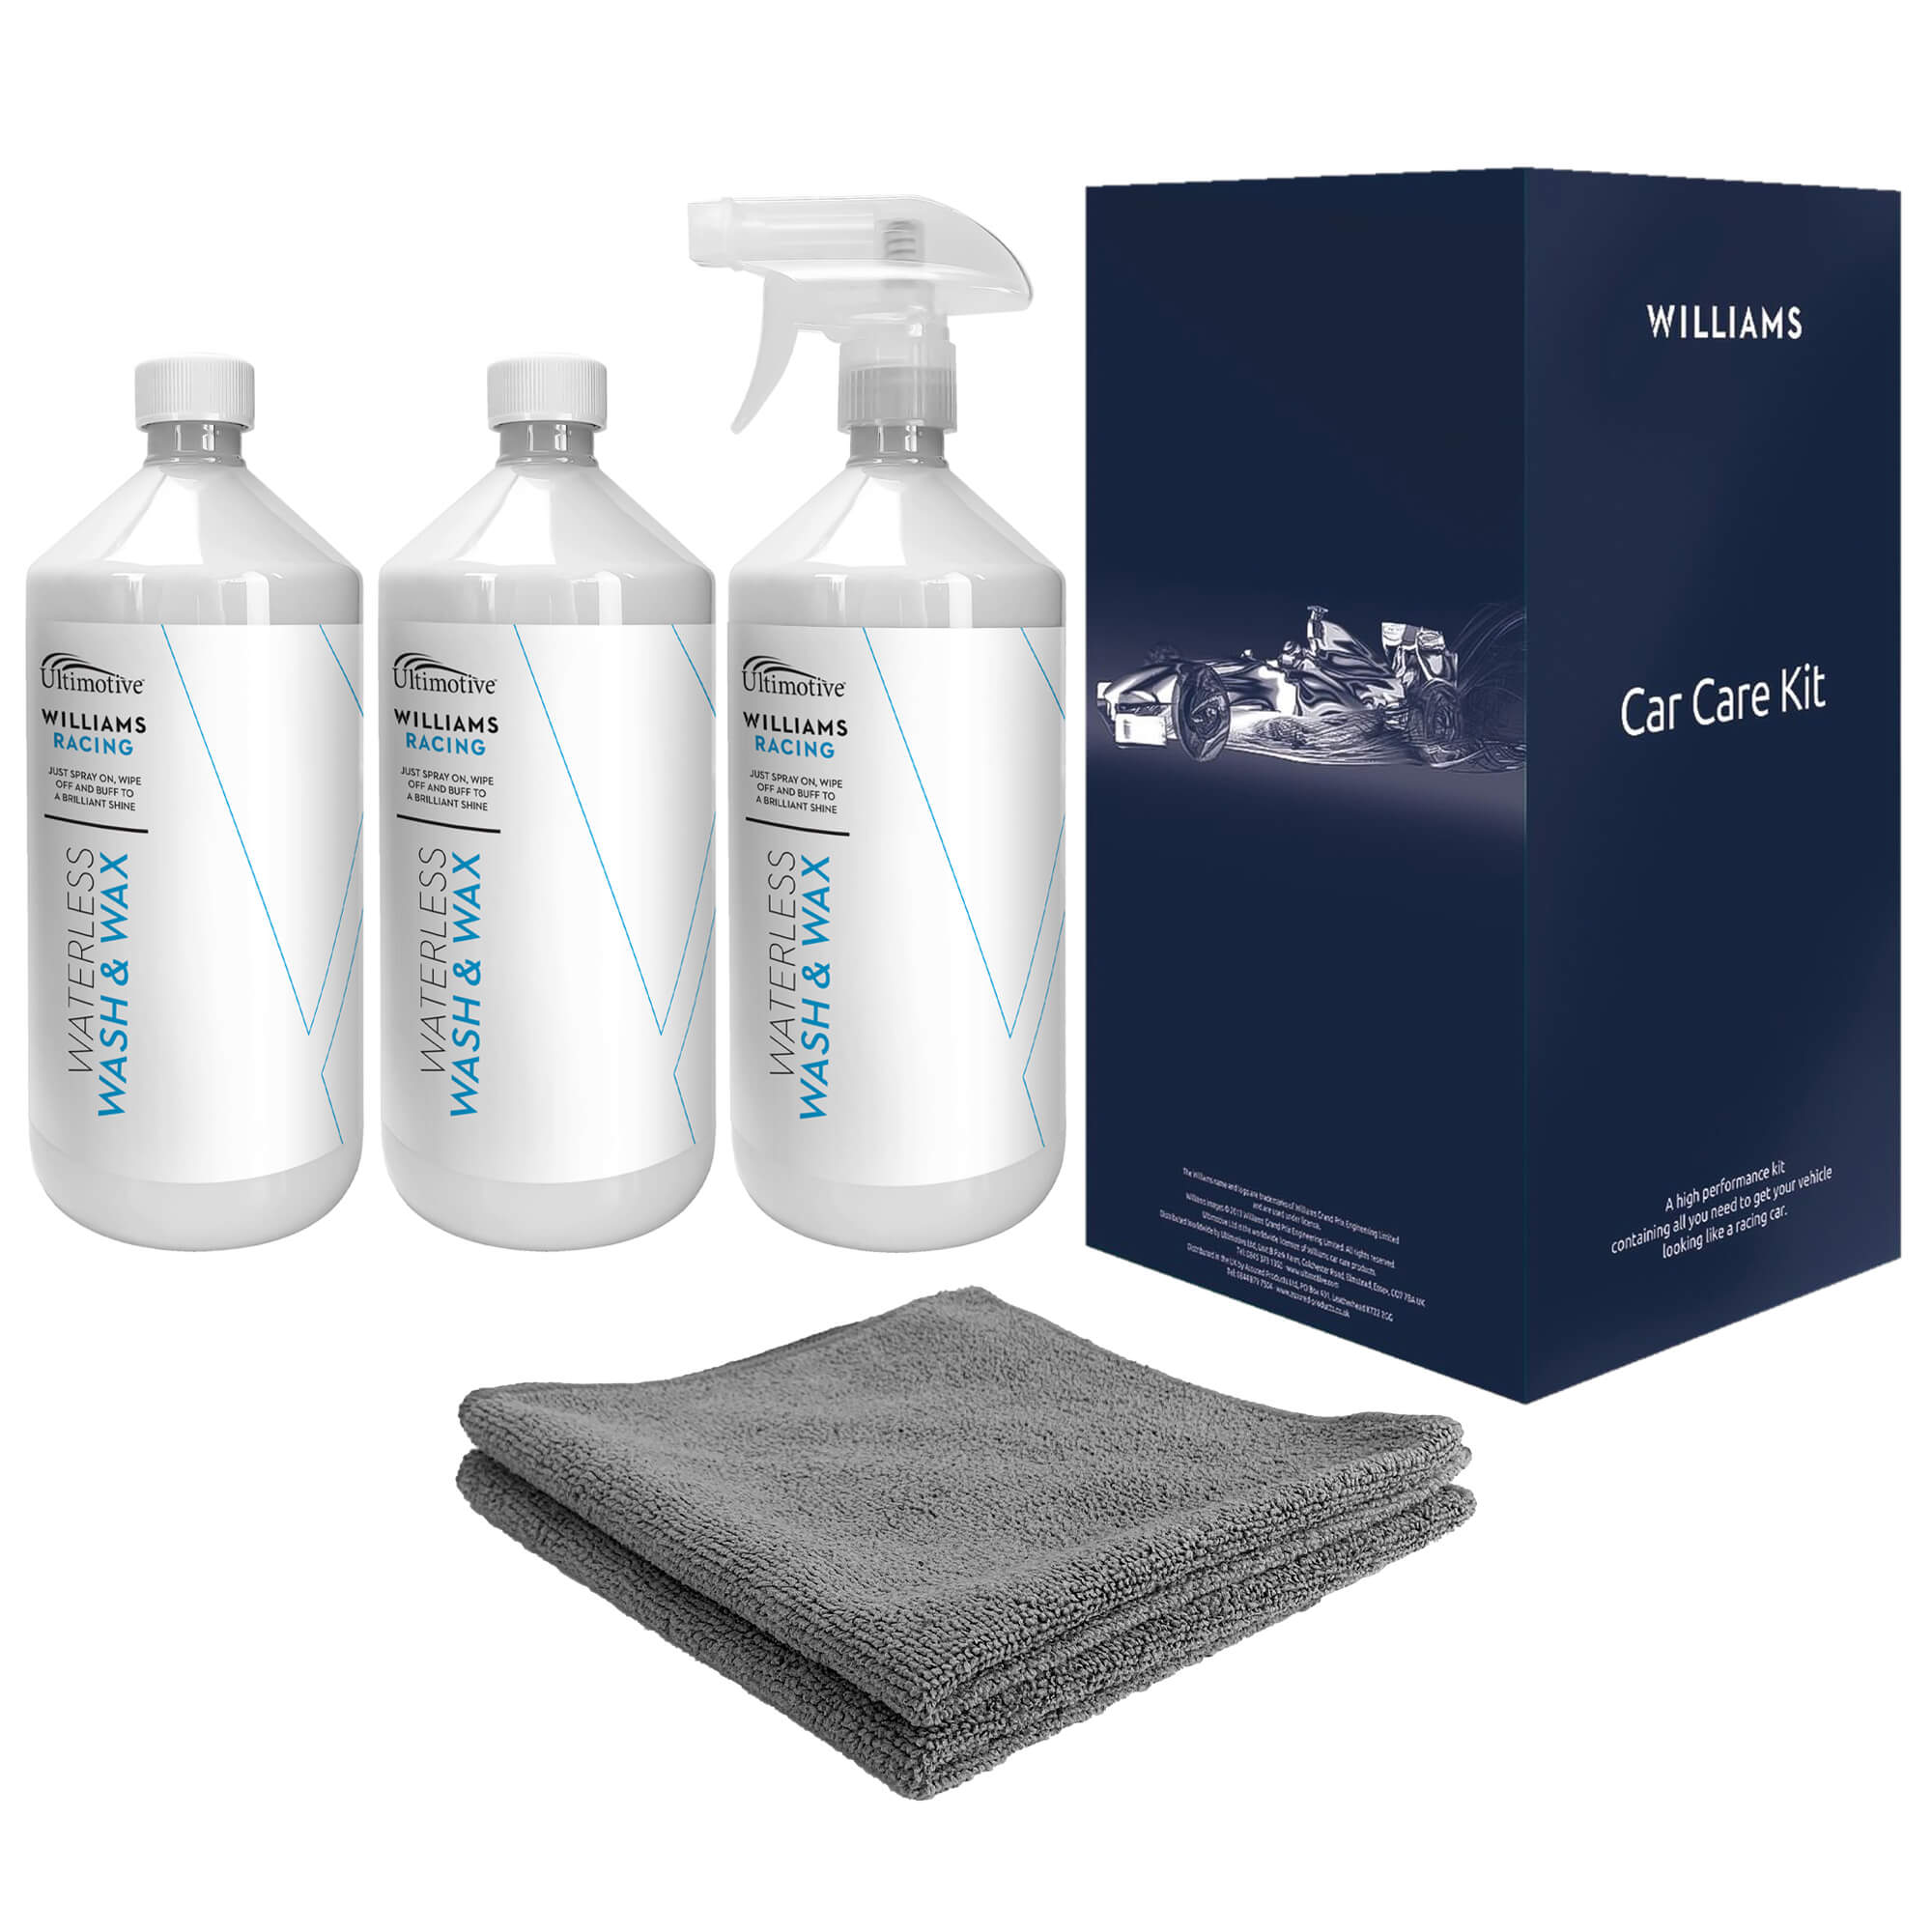 Williams Waterless Wash & Wax 3x1L in Gift Box (with 2 Microfibre Cloths)